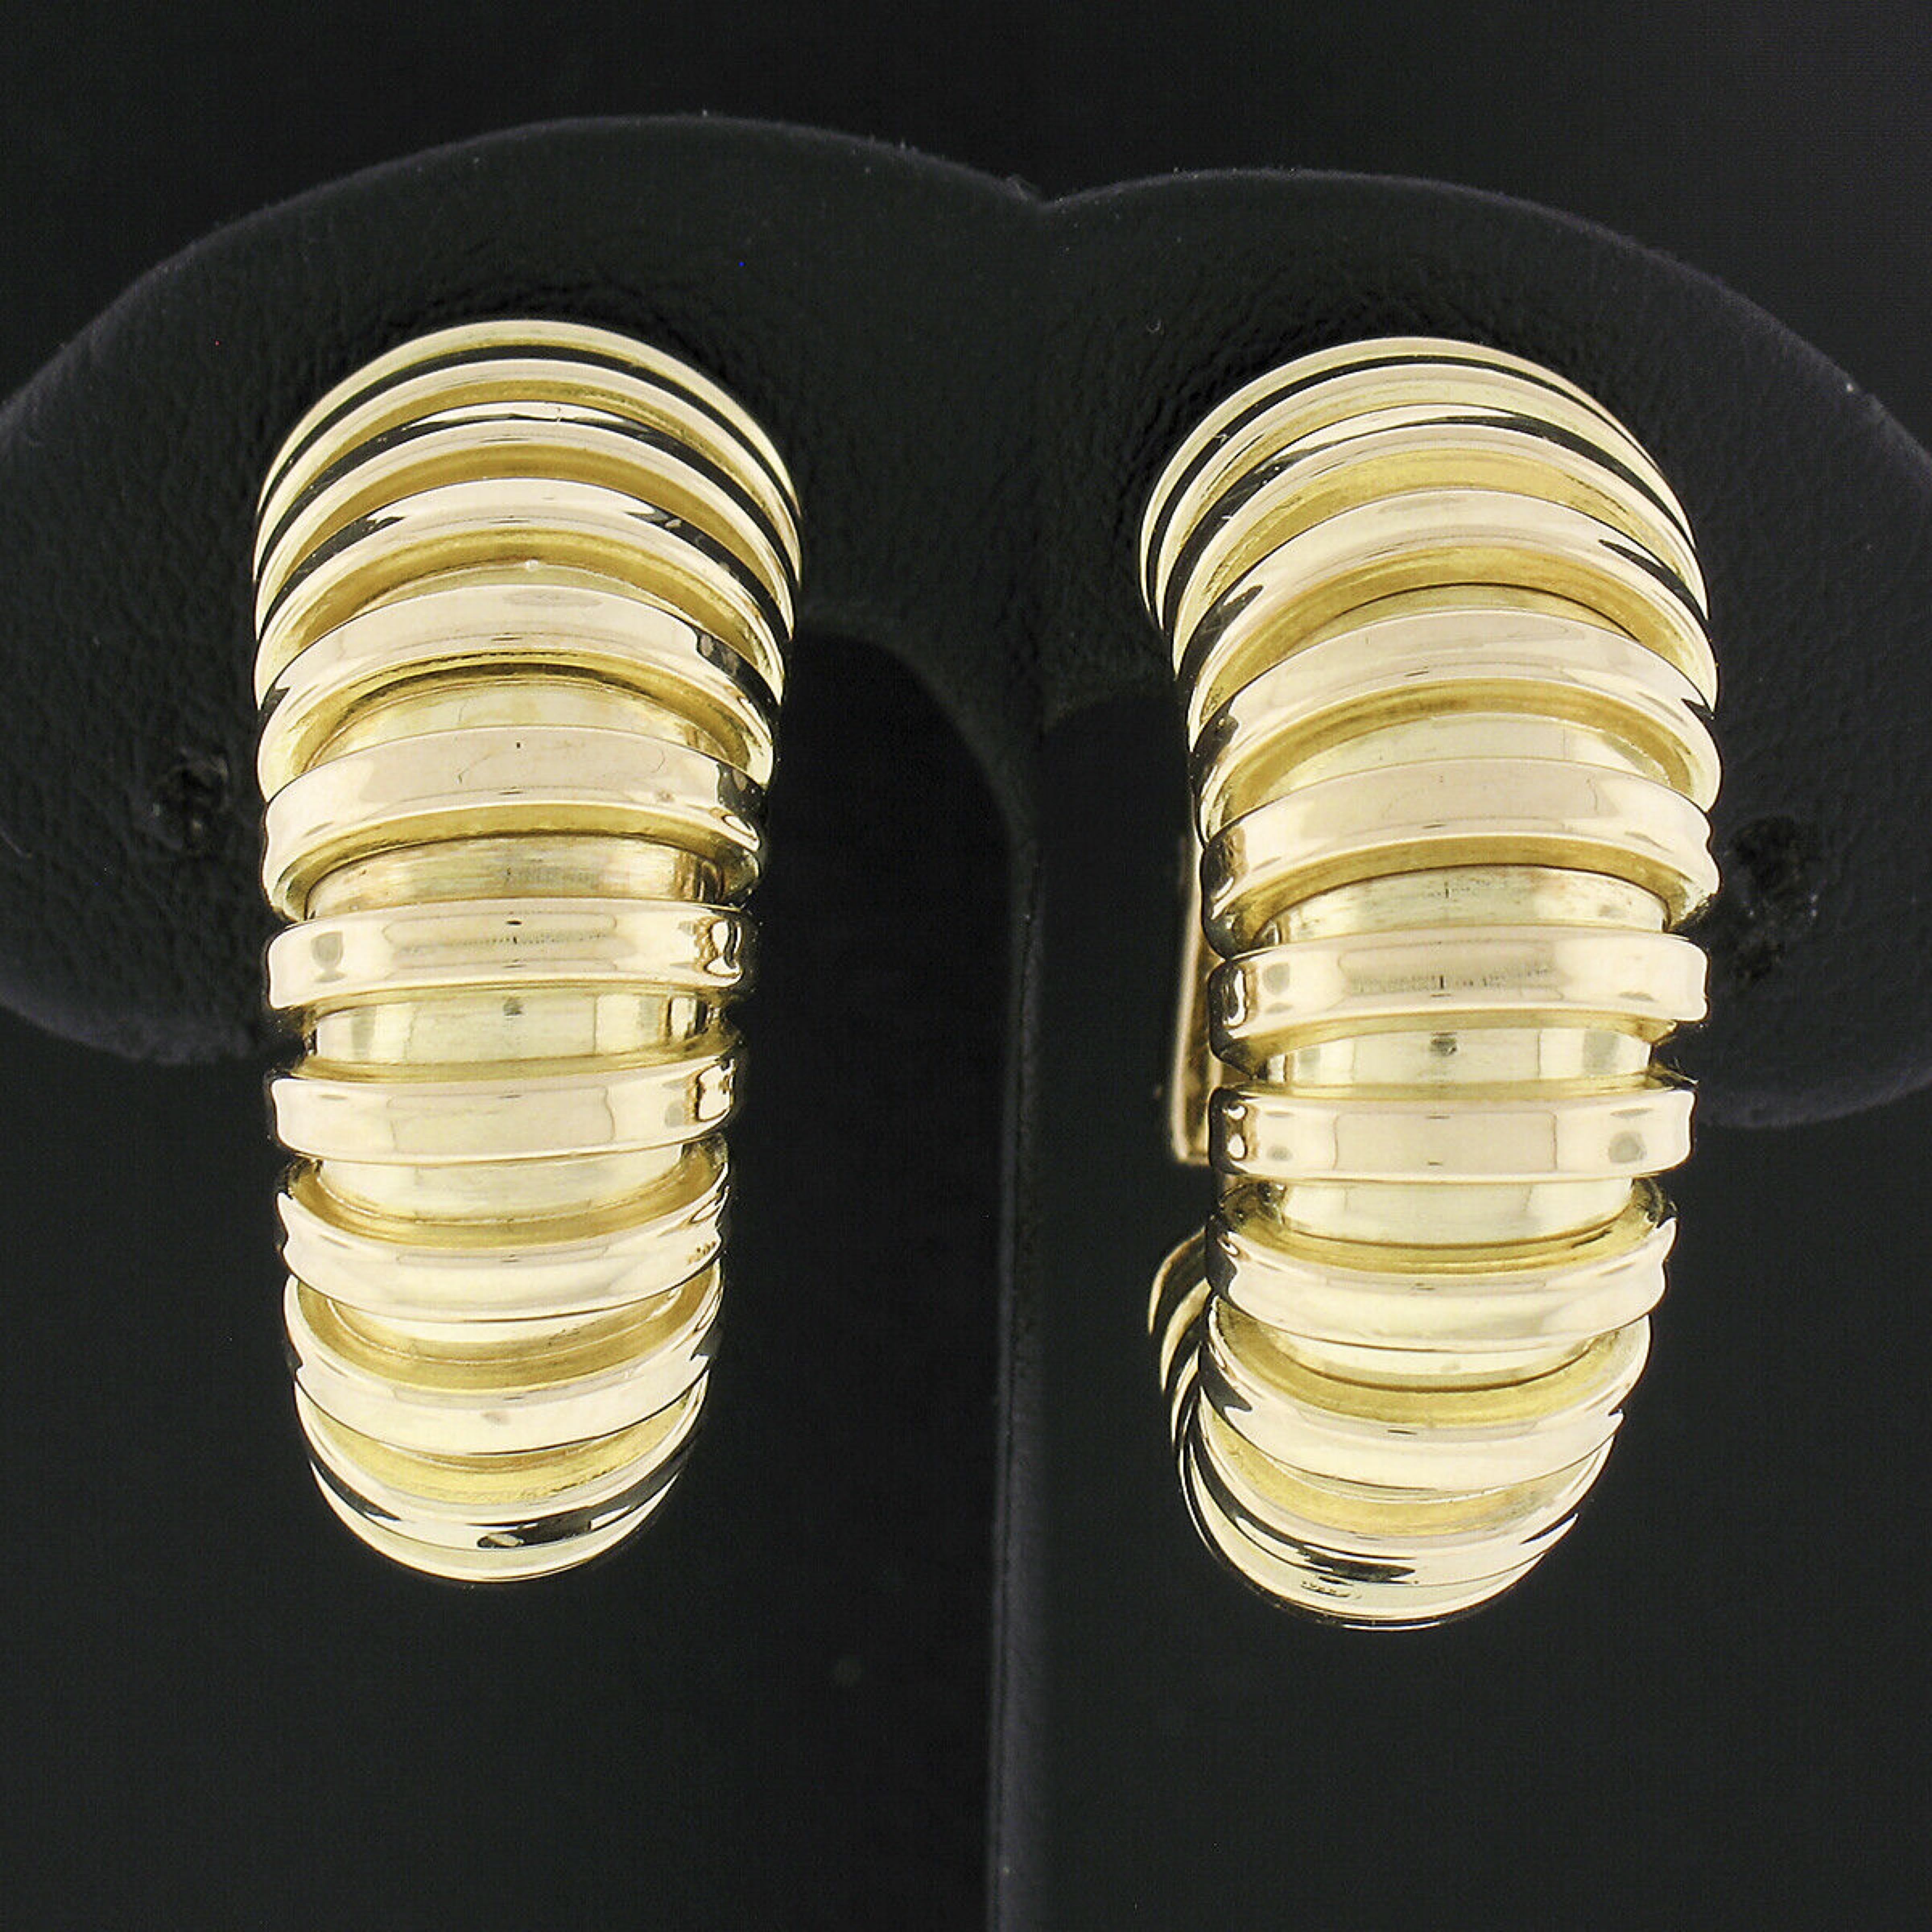 Here we have 100% authentic hoop huggie clip-on earrings made by the famous designer Fred from Paris, France. The earrings are crafted from solid 14k yellow gold and feature an elegant grooved design that graduates in width from the top to the